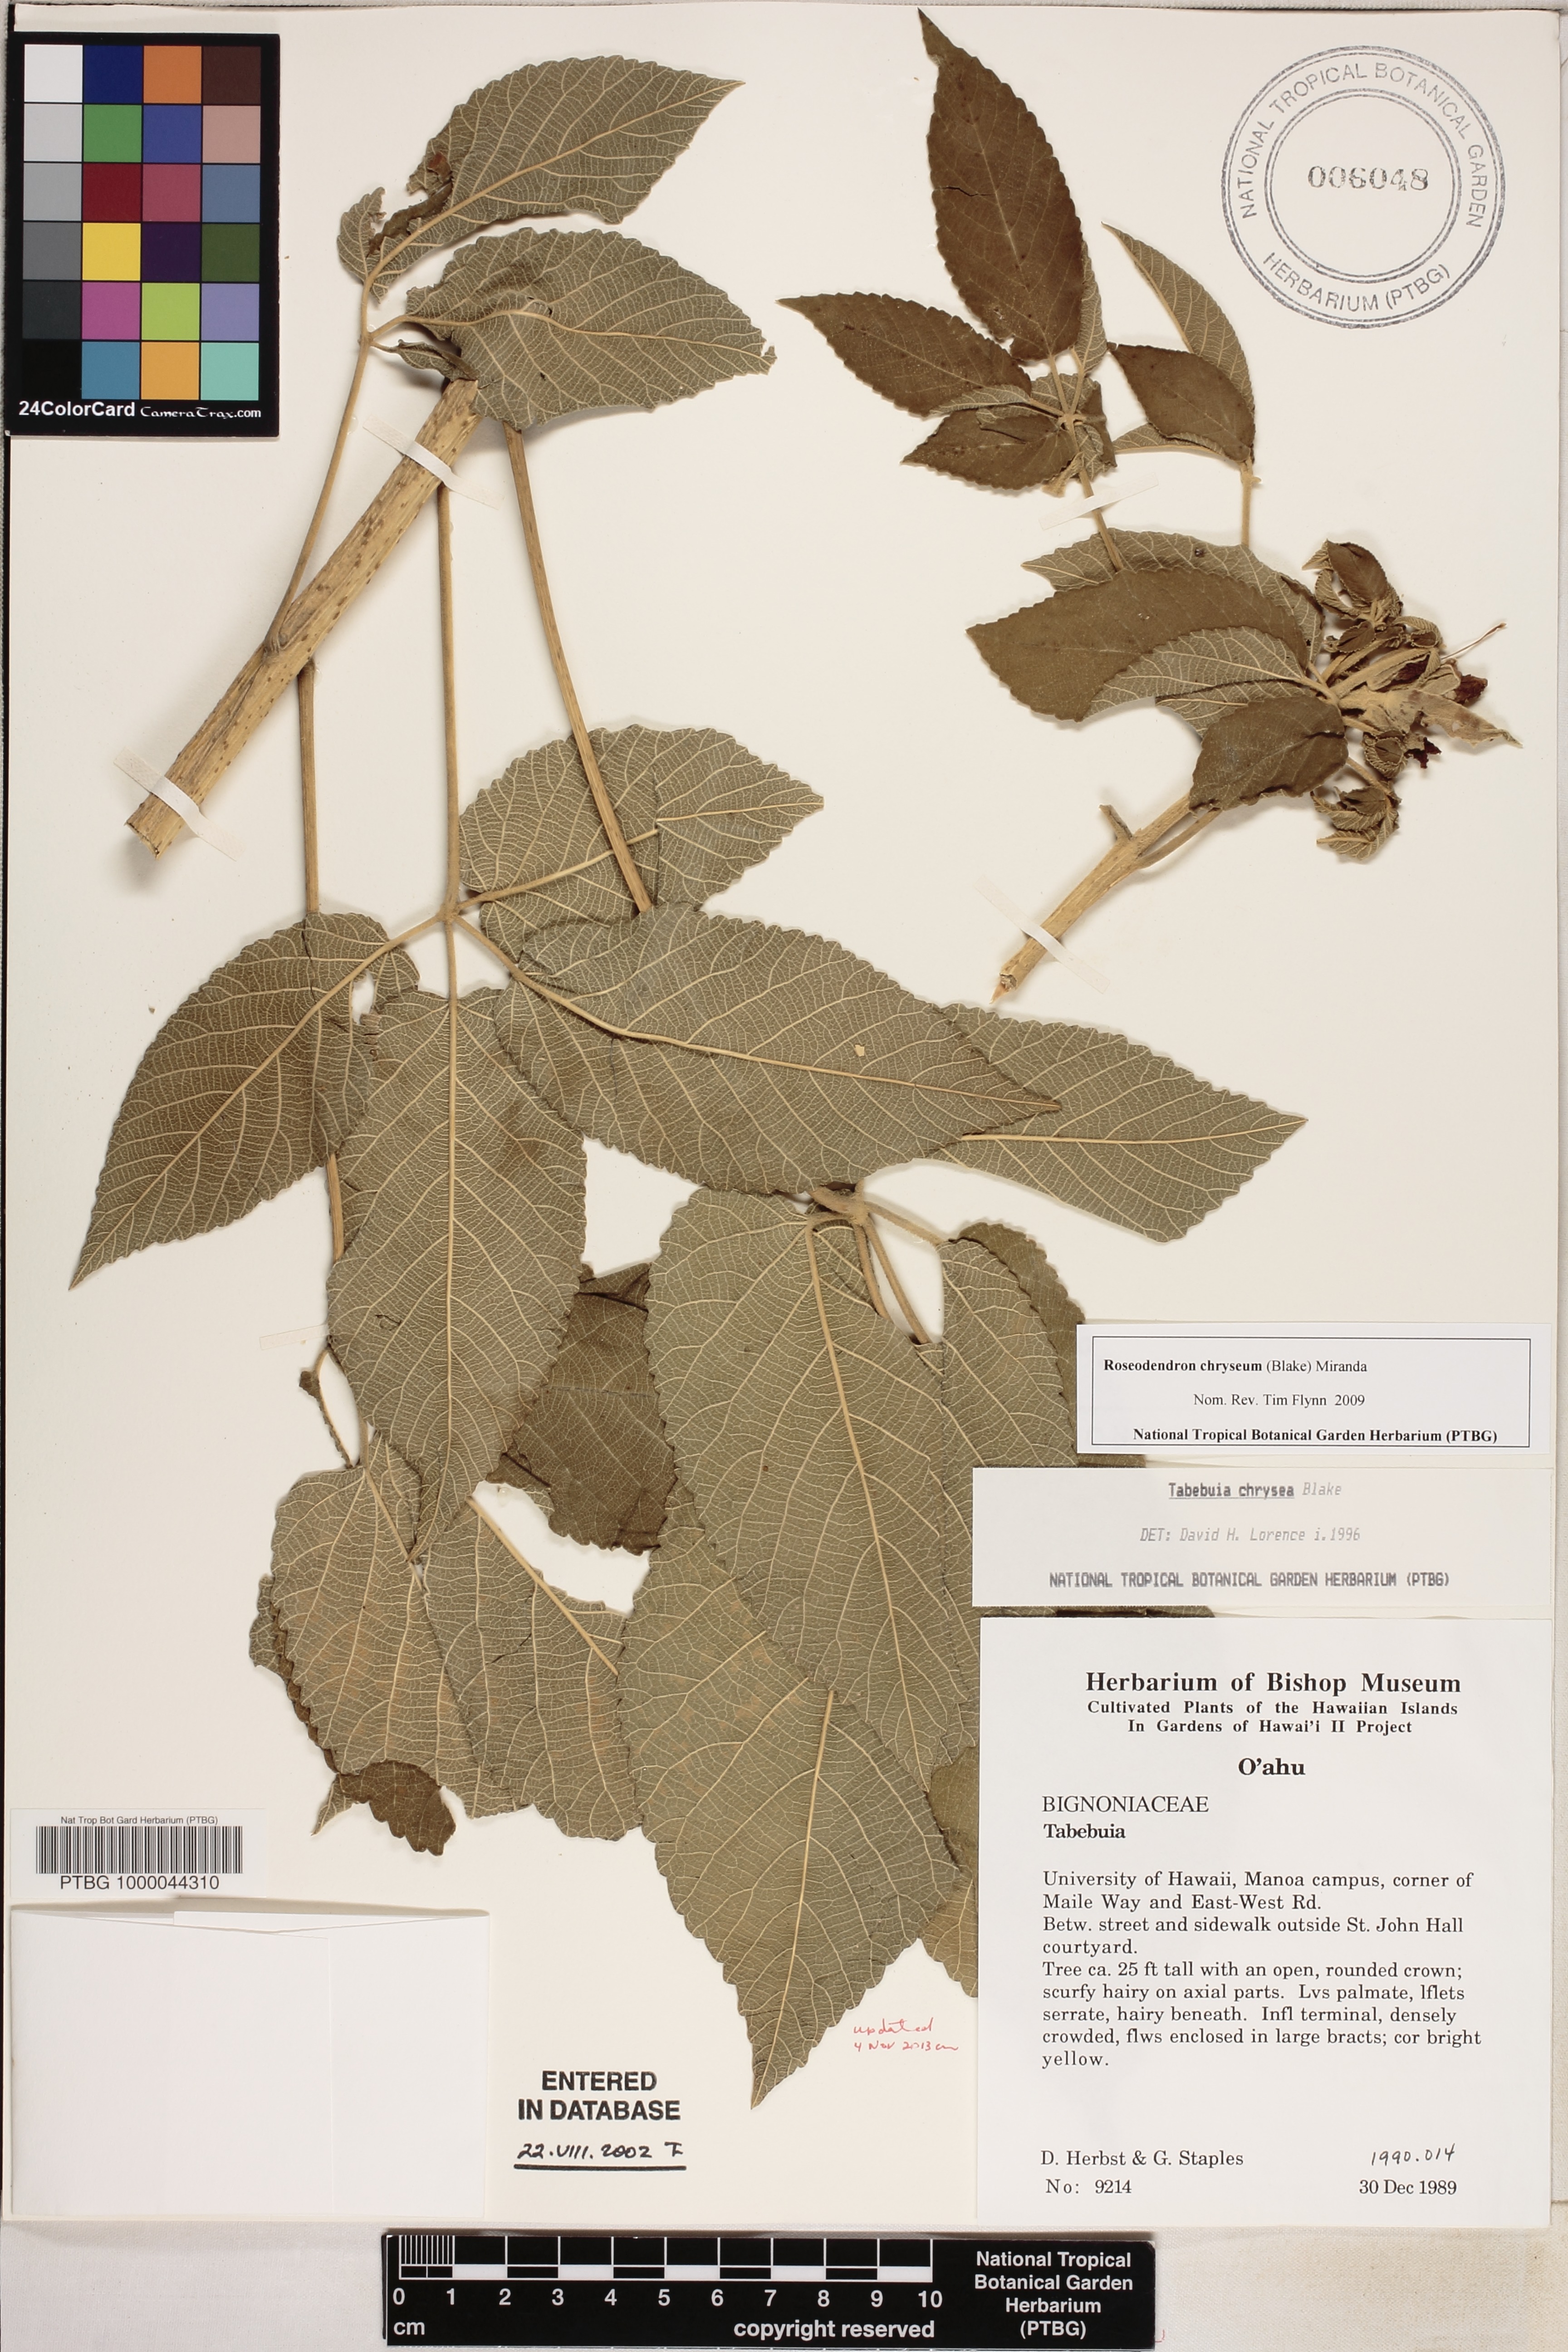 Roseodendron image